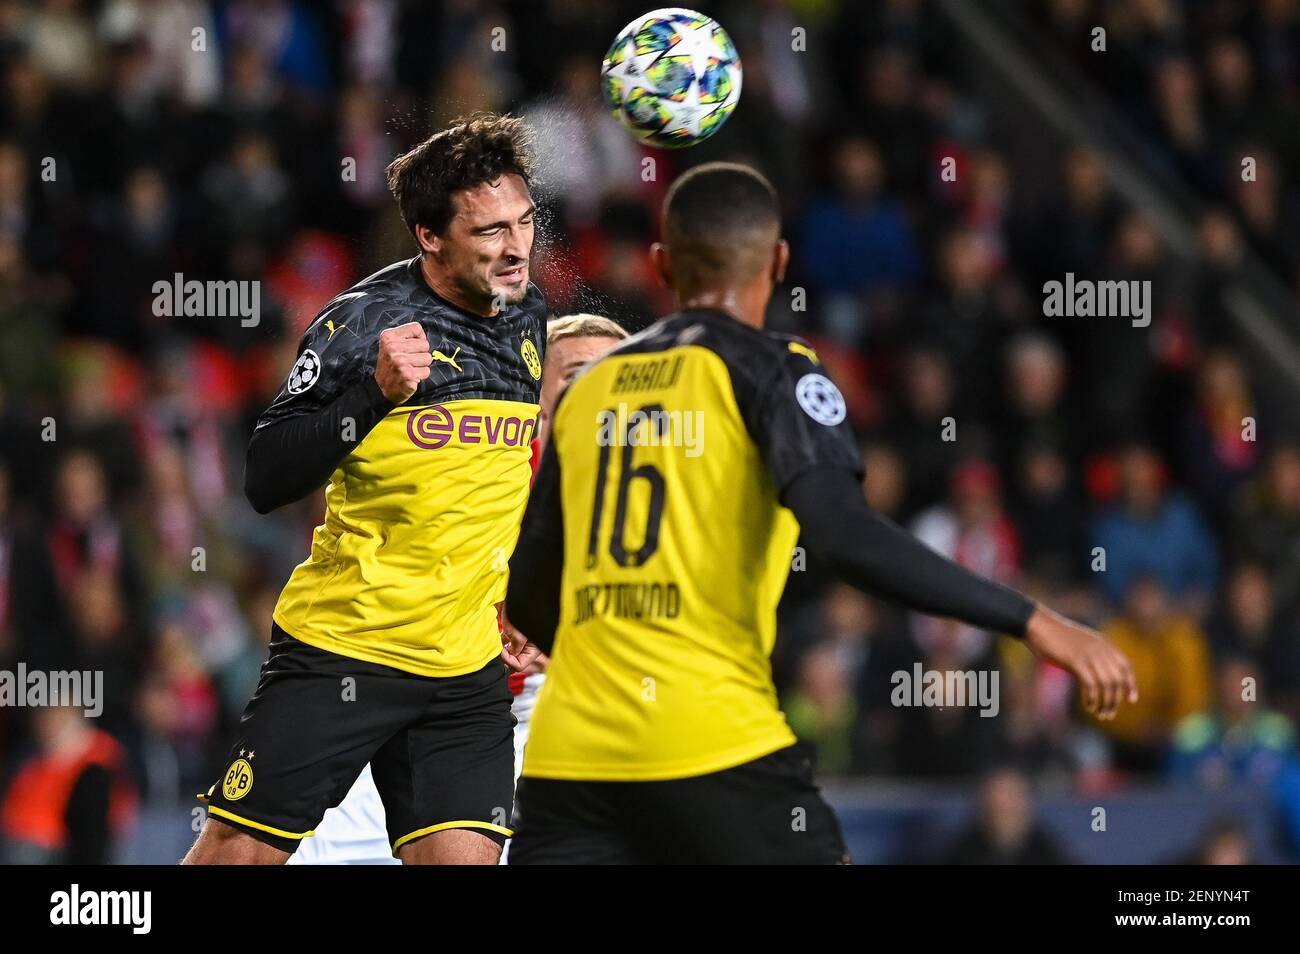 Mats Hummels from Borussia Dortmund in action during the UEFA Champions  League (Group F) match between Slavia Prague and Borussia Dortmund in Prague.  (Final score; Slavia Prague 0:2 Borussia Dortmund) (Photo by